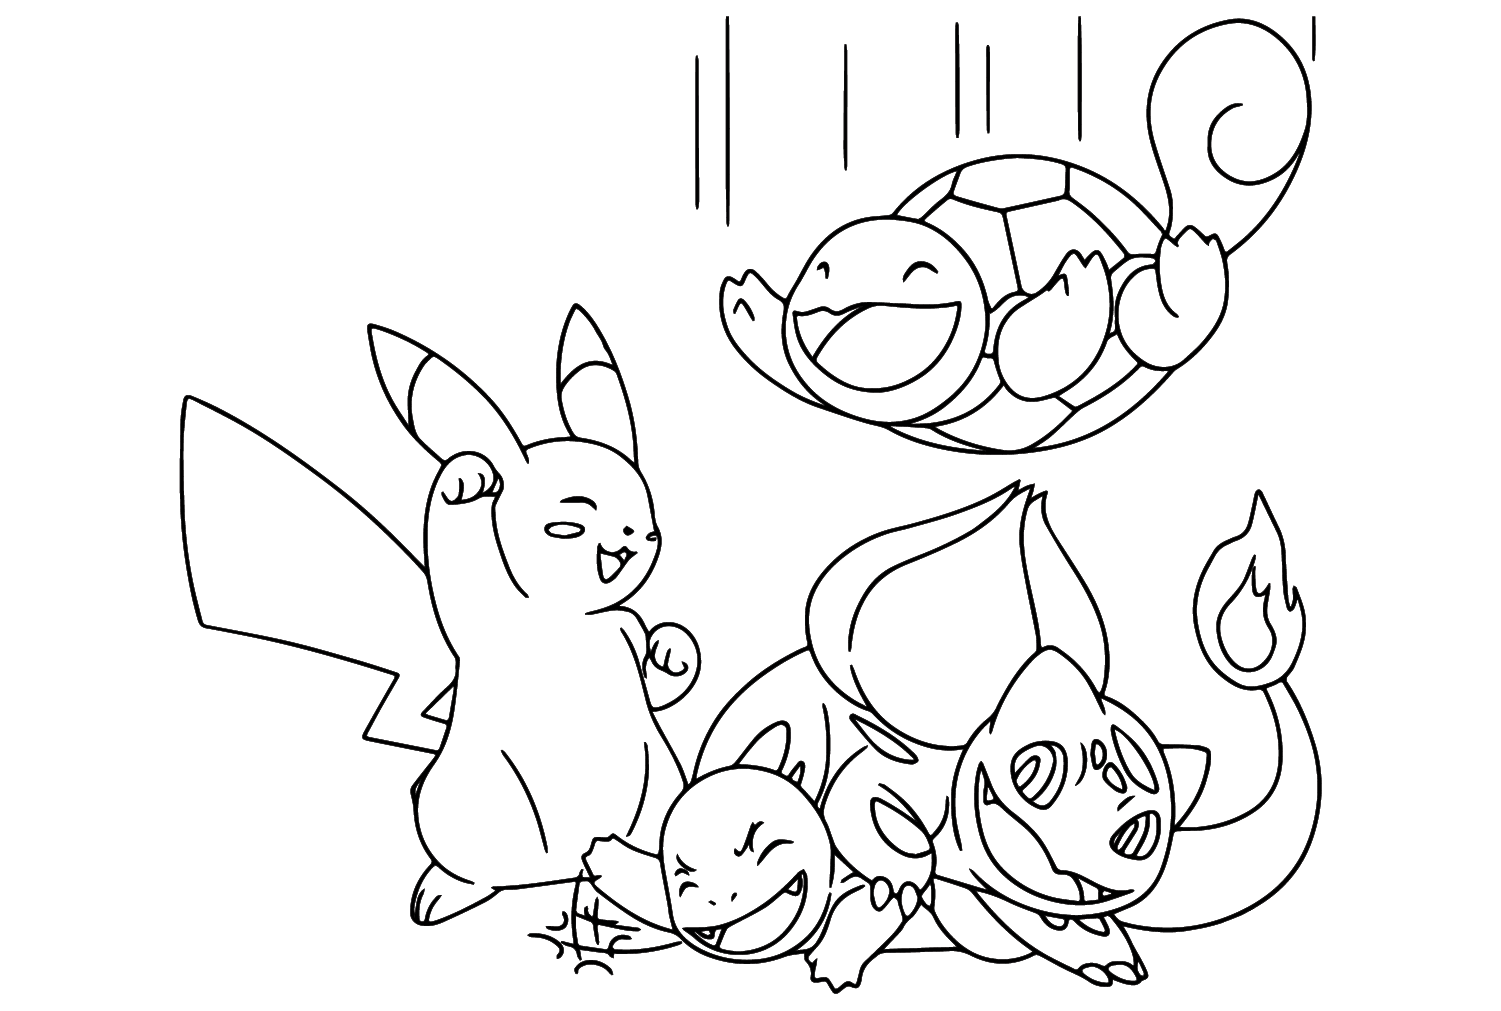 Pikachu and Squirtle, Charmander, Bulbasaur Coloring Page from Squirtle